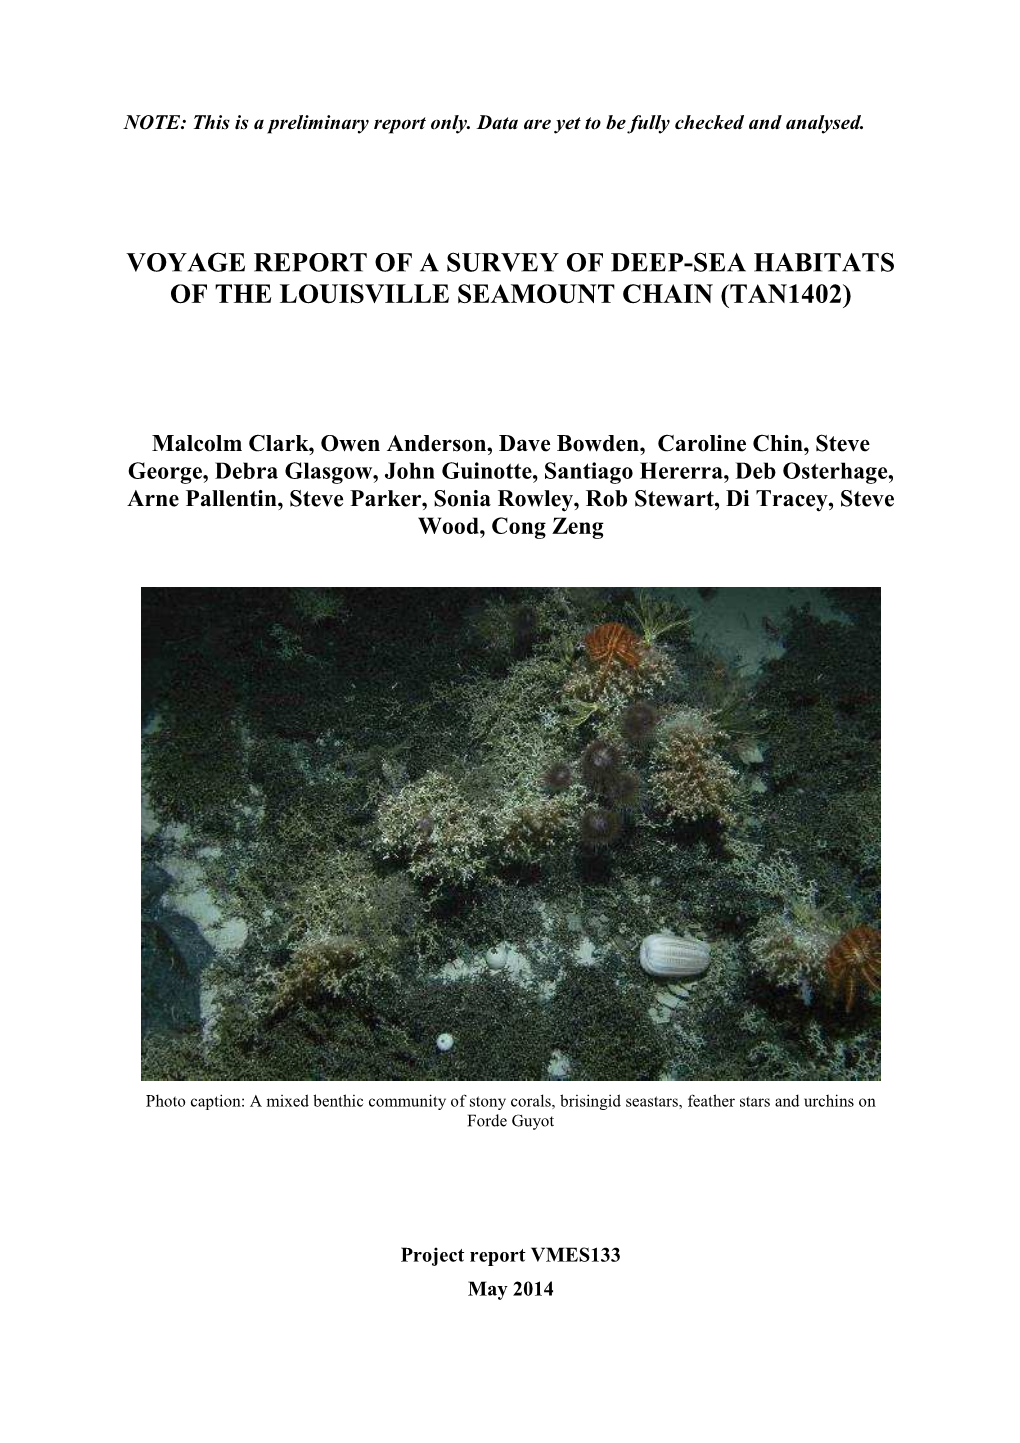 Voyage Report of a Survey of Deep-Sea Habitats of the Louisville Seamount Chain (Tan1402)